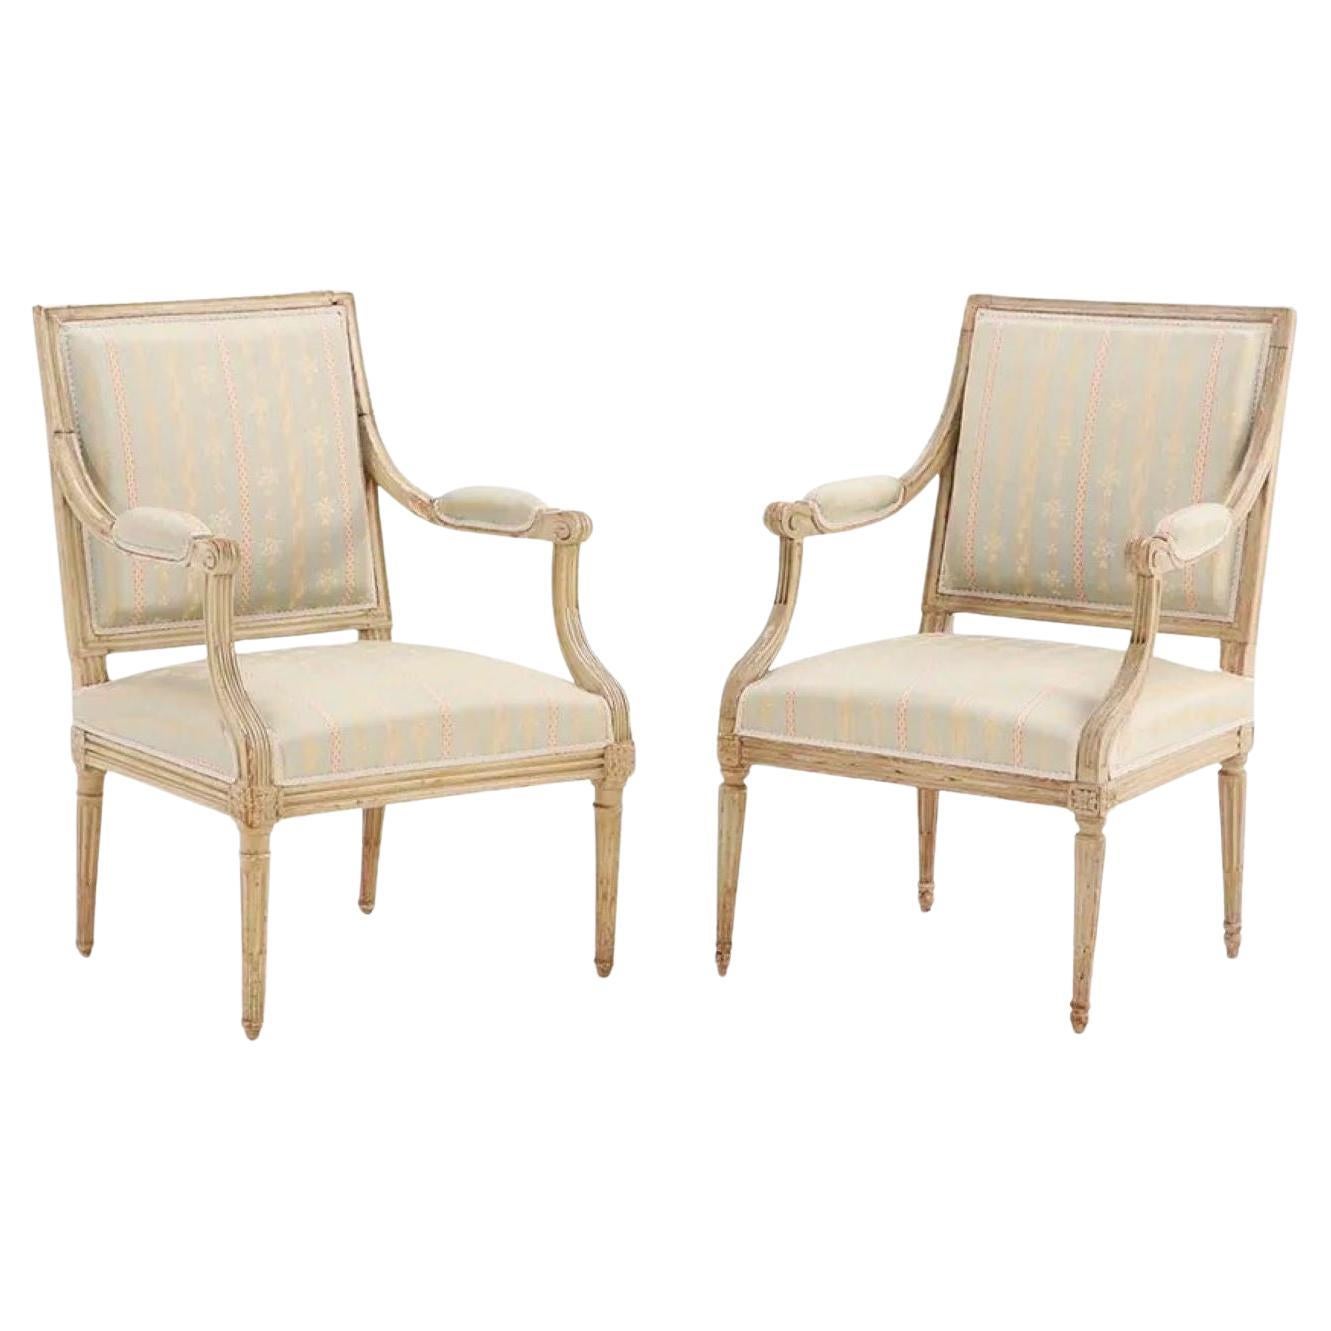 Matched Pair of Louis XVI Armchairs, 18th C., Signed AP Dupain